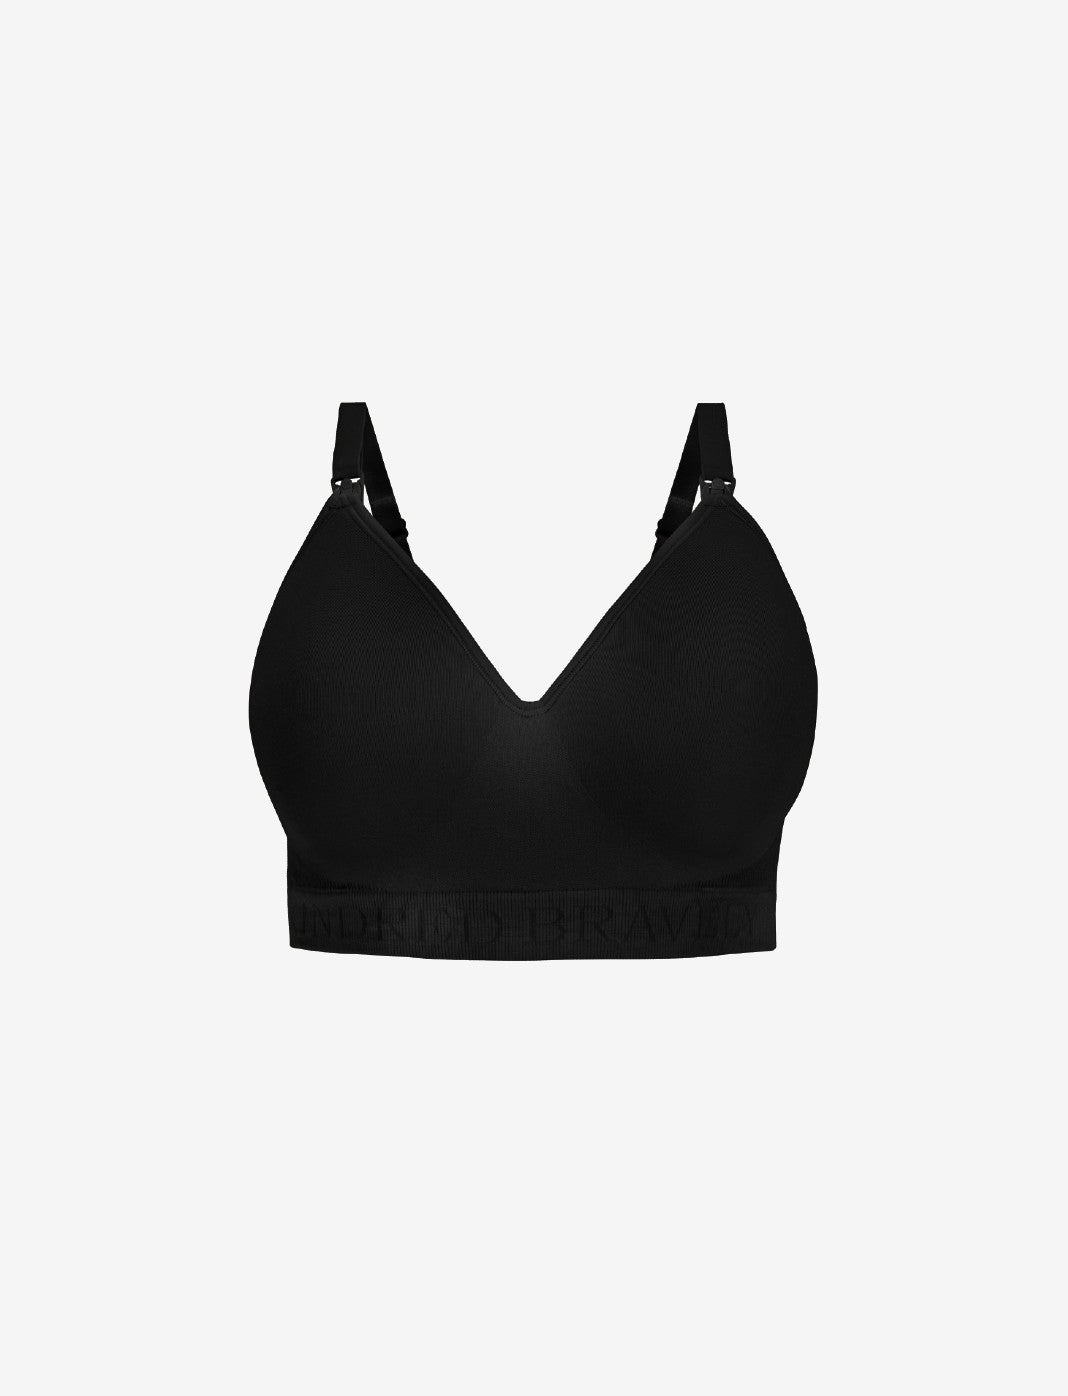 Kindred Bravely Sublime Support Low Impact Nursing & Maternity Sports Bra -  Black, Small